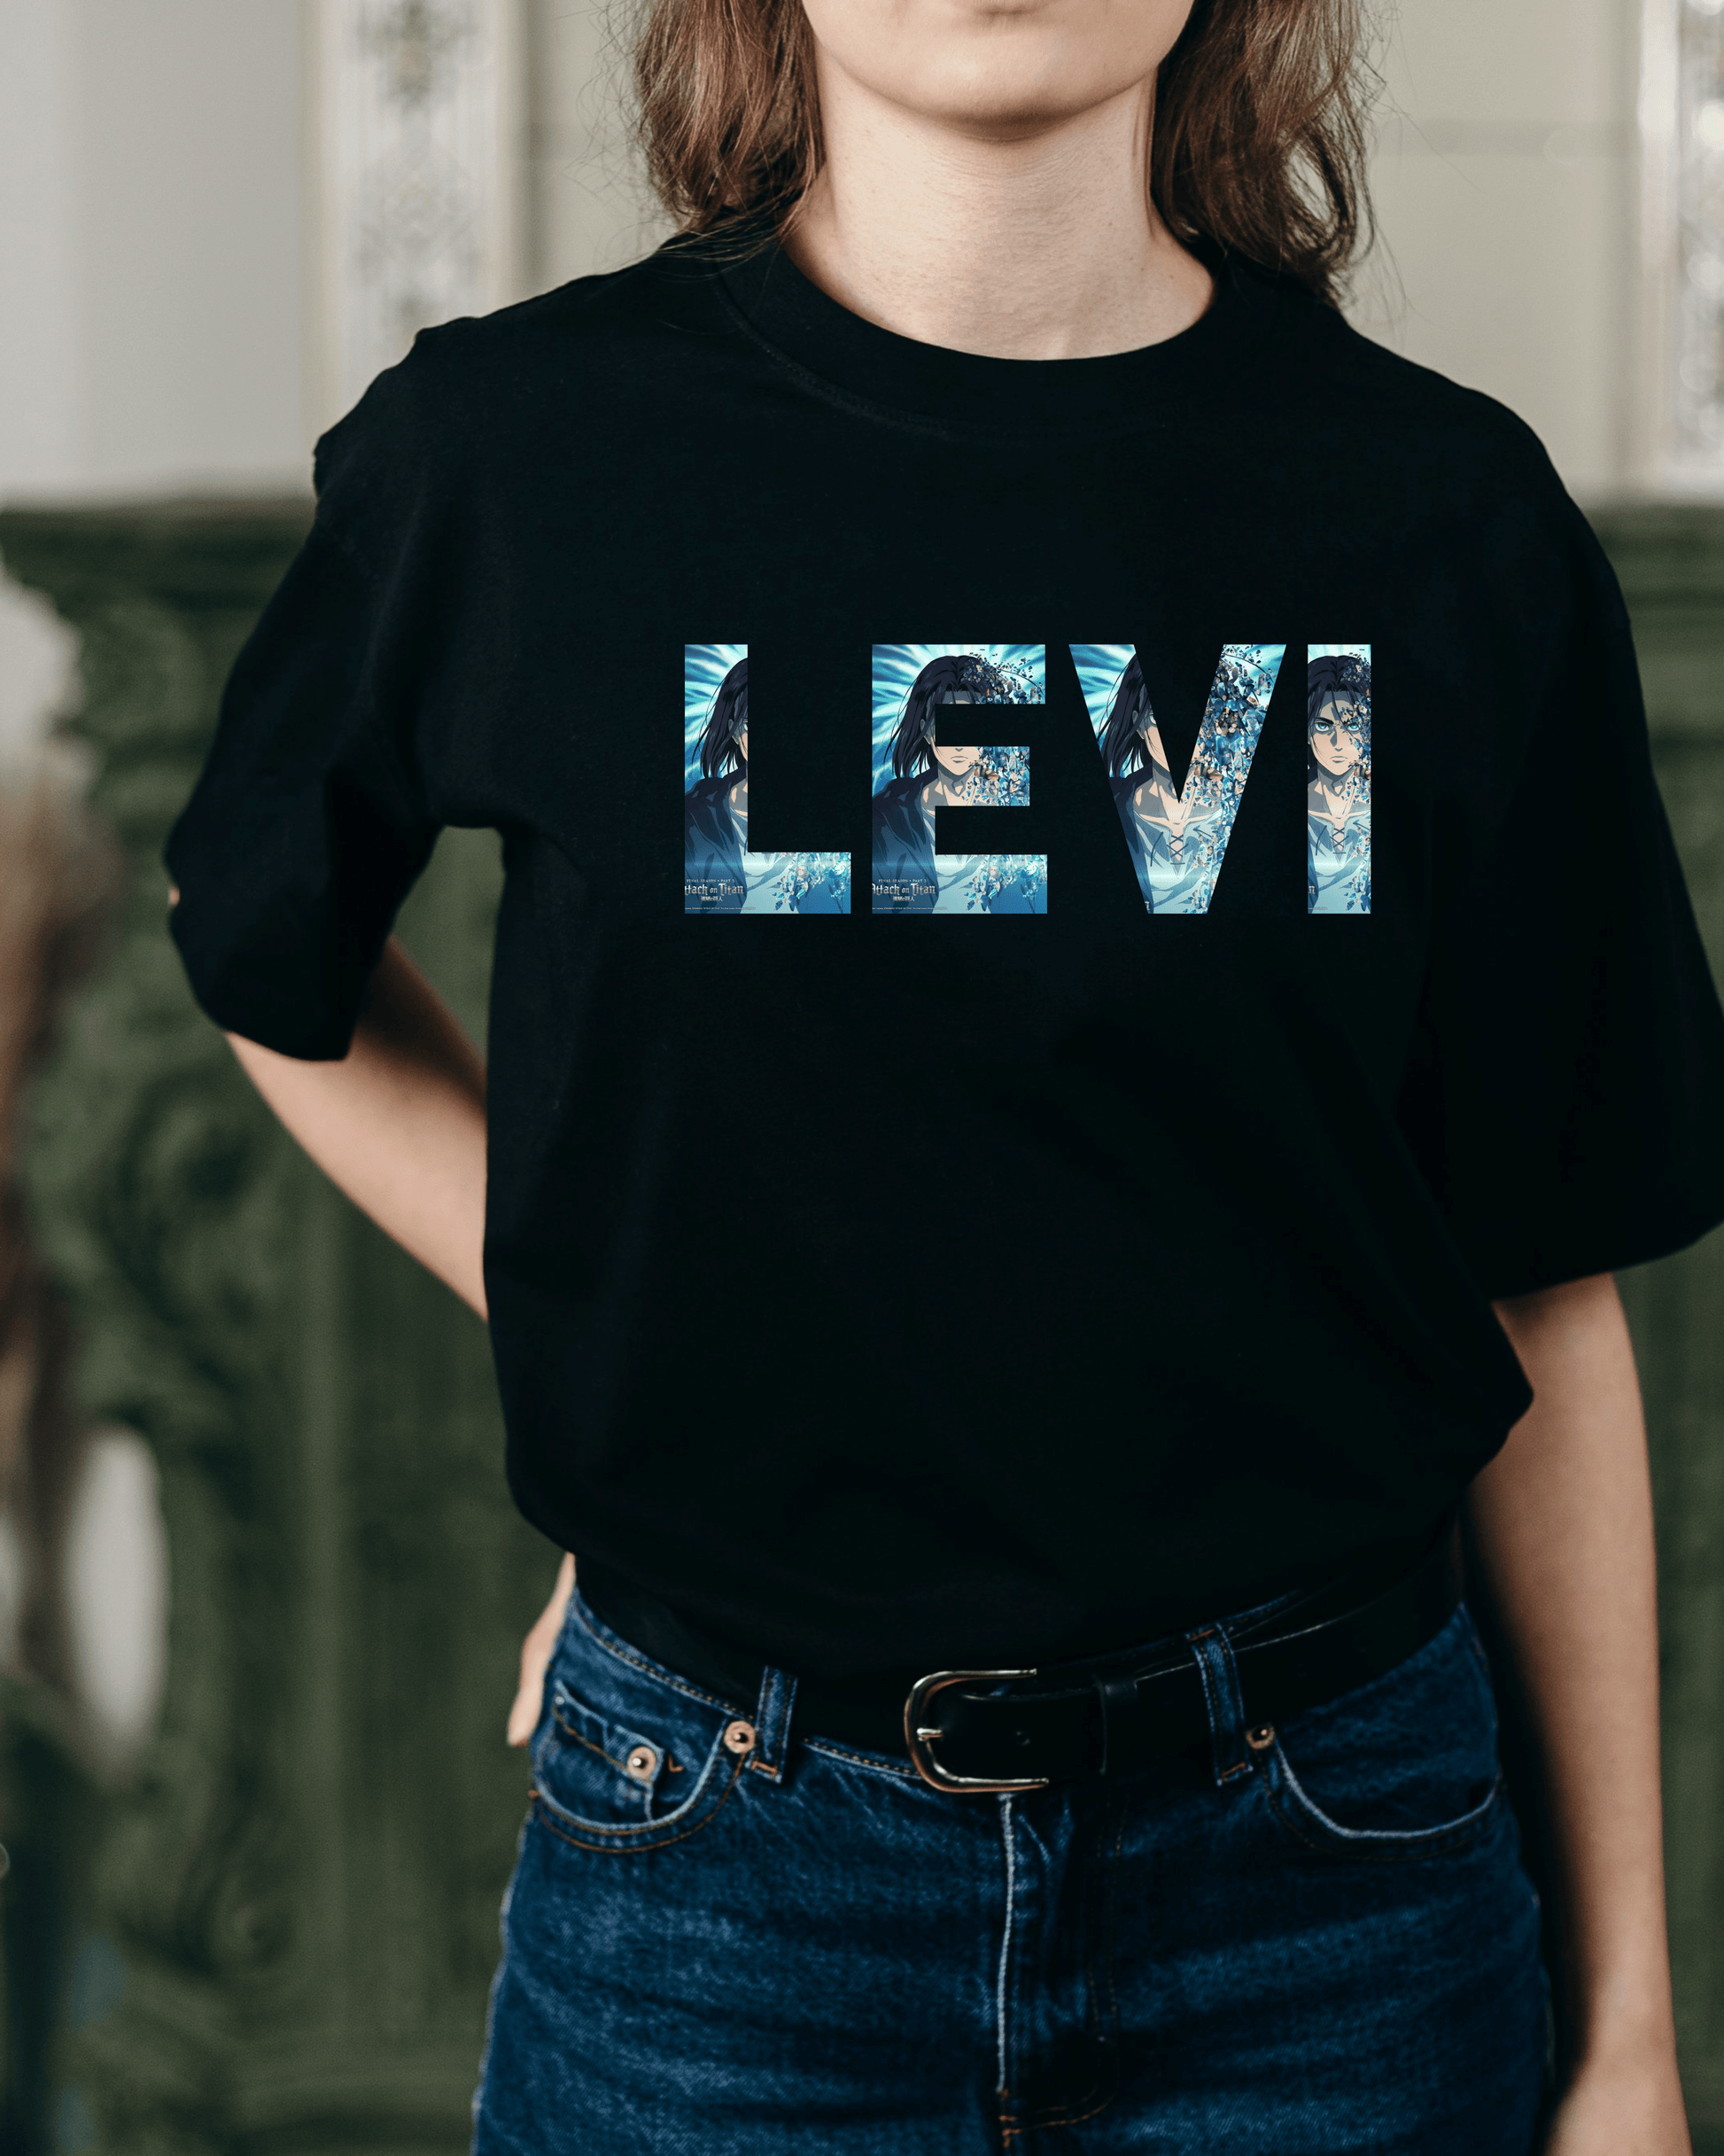 https://www.candidpot.com/products/levi-ackerman-shirt-attack-on-titan-shirt-attack-on-titan-tshirt-anime-shirt-aot-shirt-levi-ackerman-tshirt-made-in-usa-unisex-heavy-cotton-tee